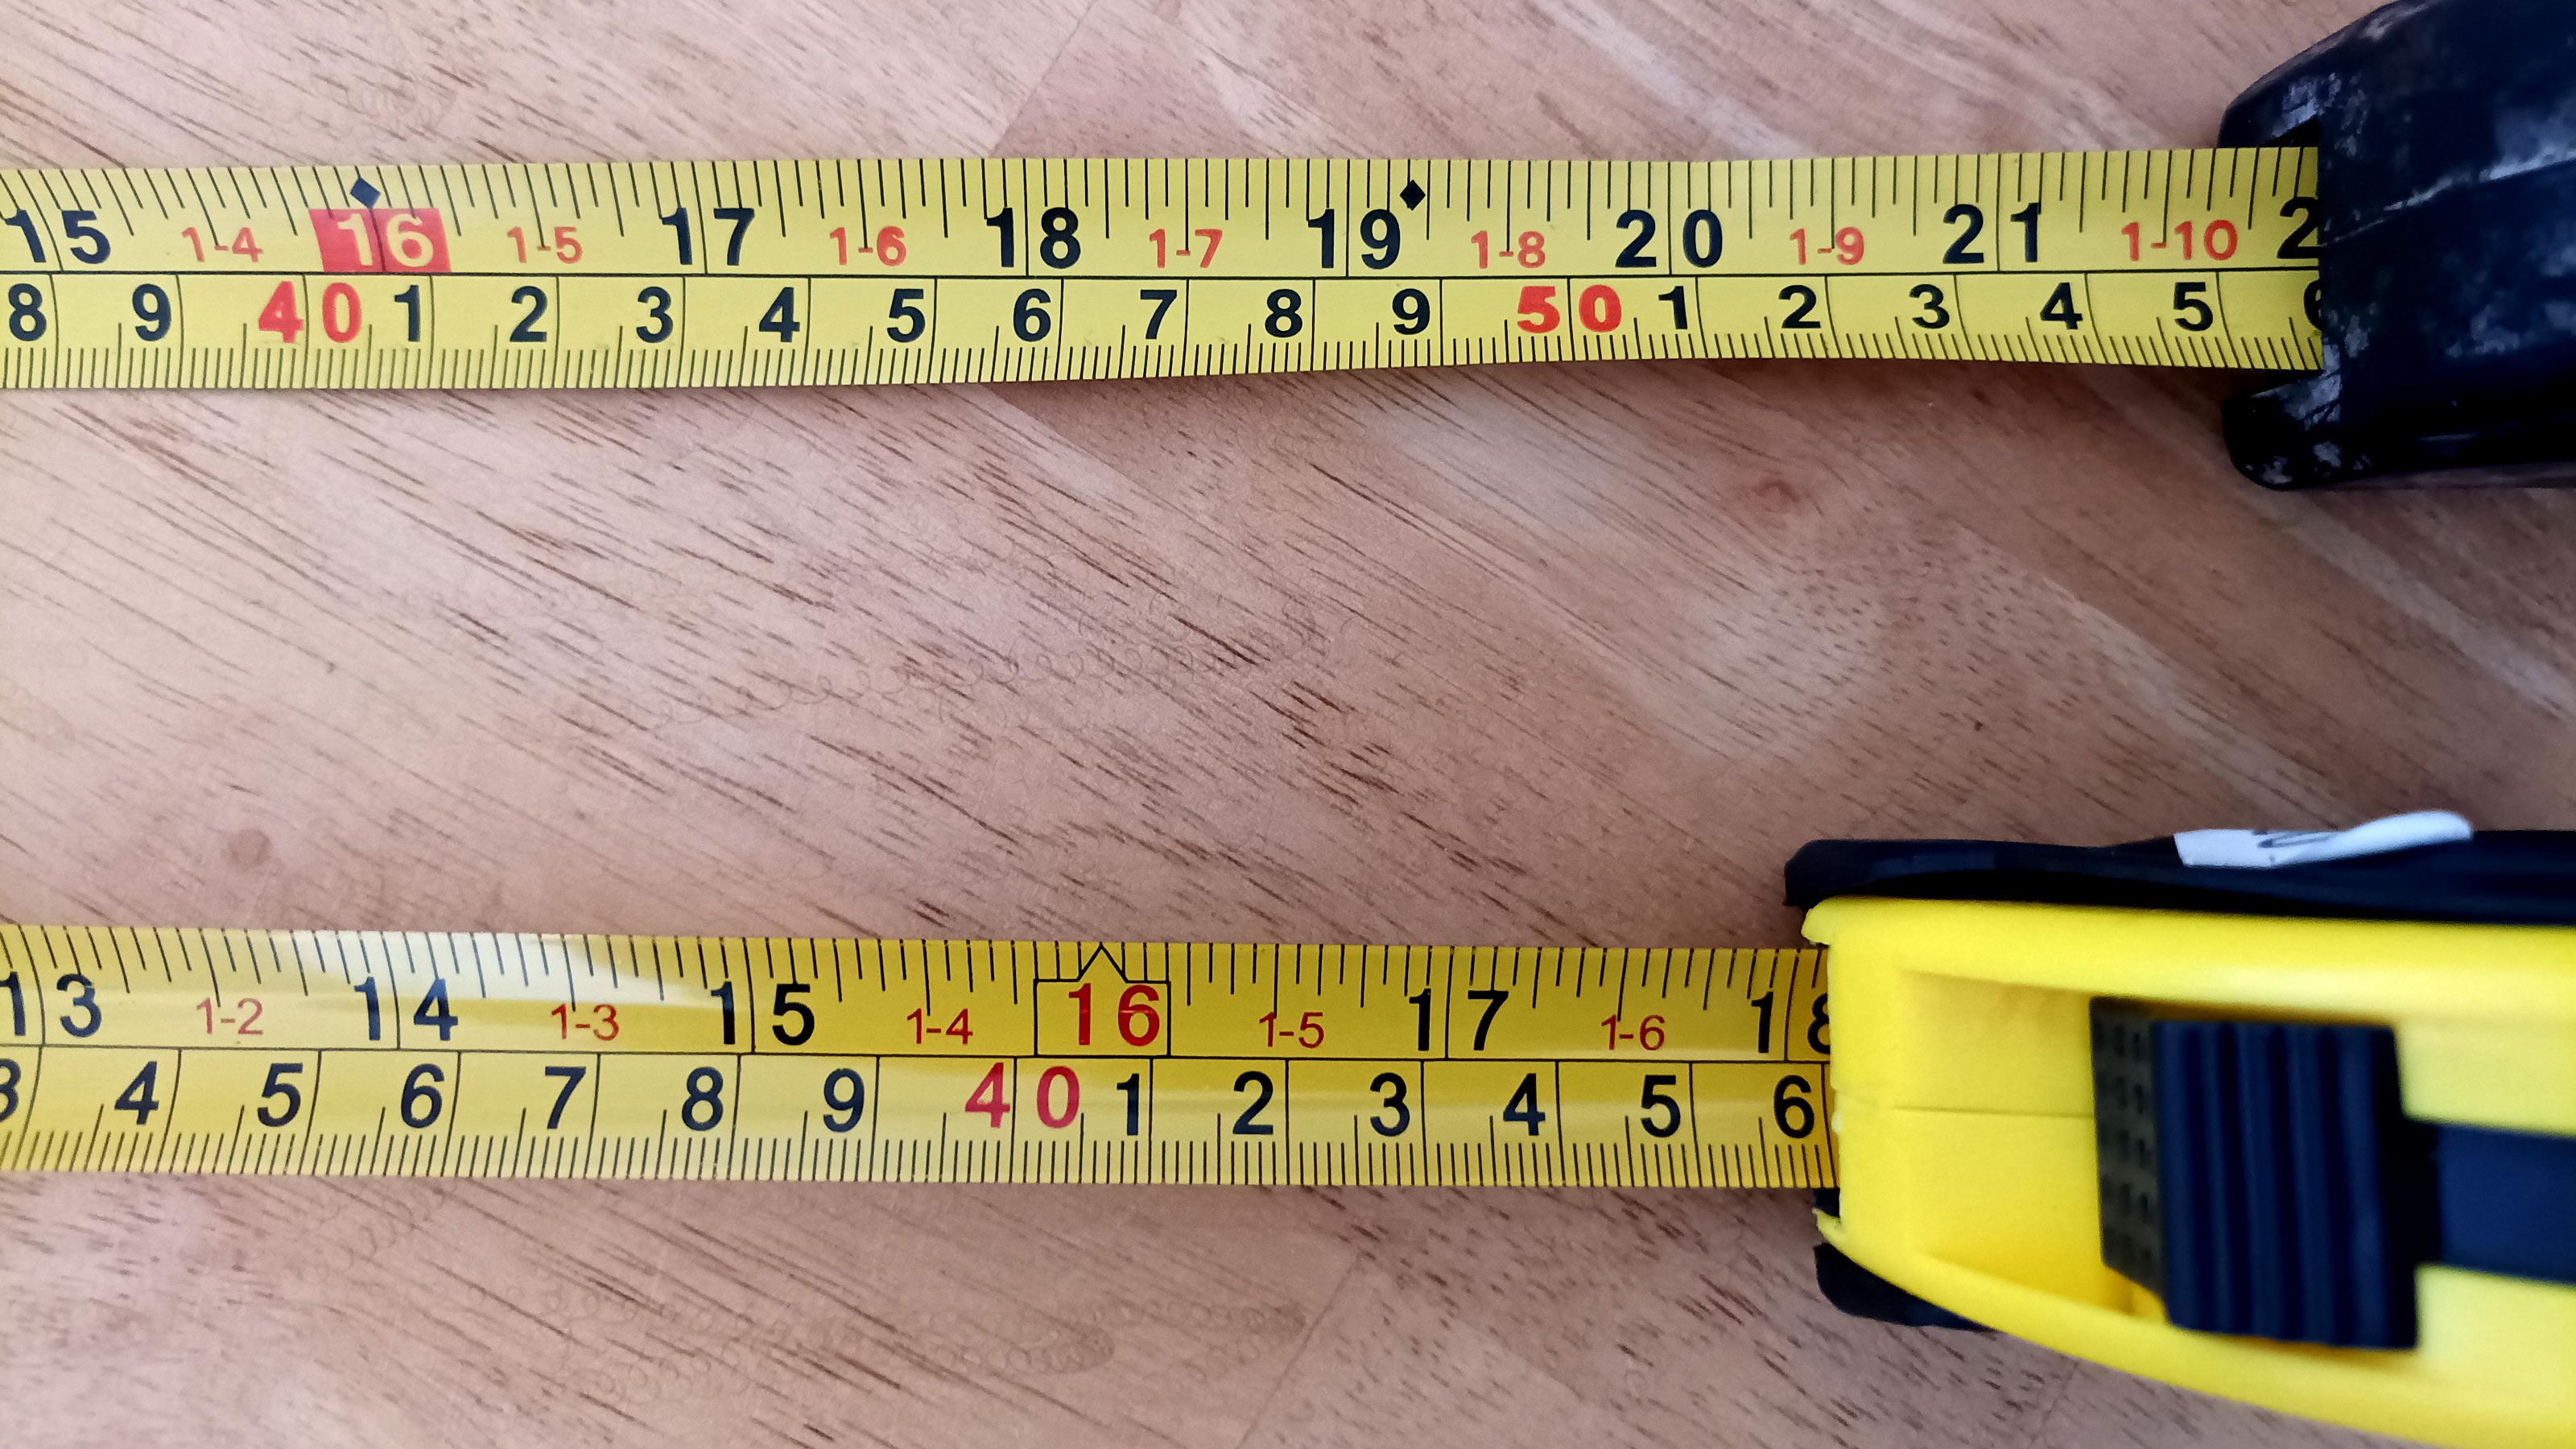 Top down view of two Imperial/Metric tape measures side by side